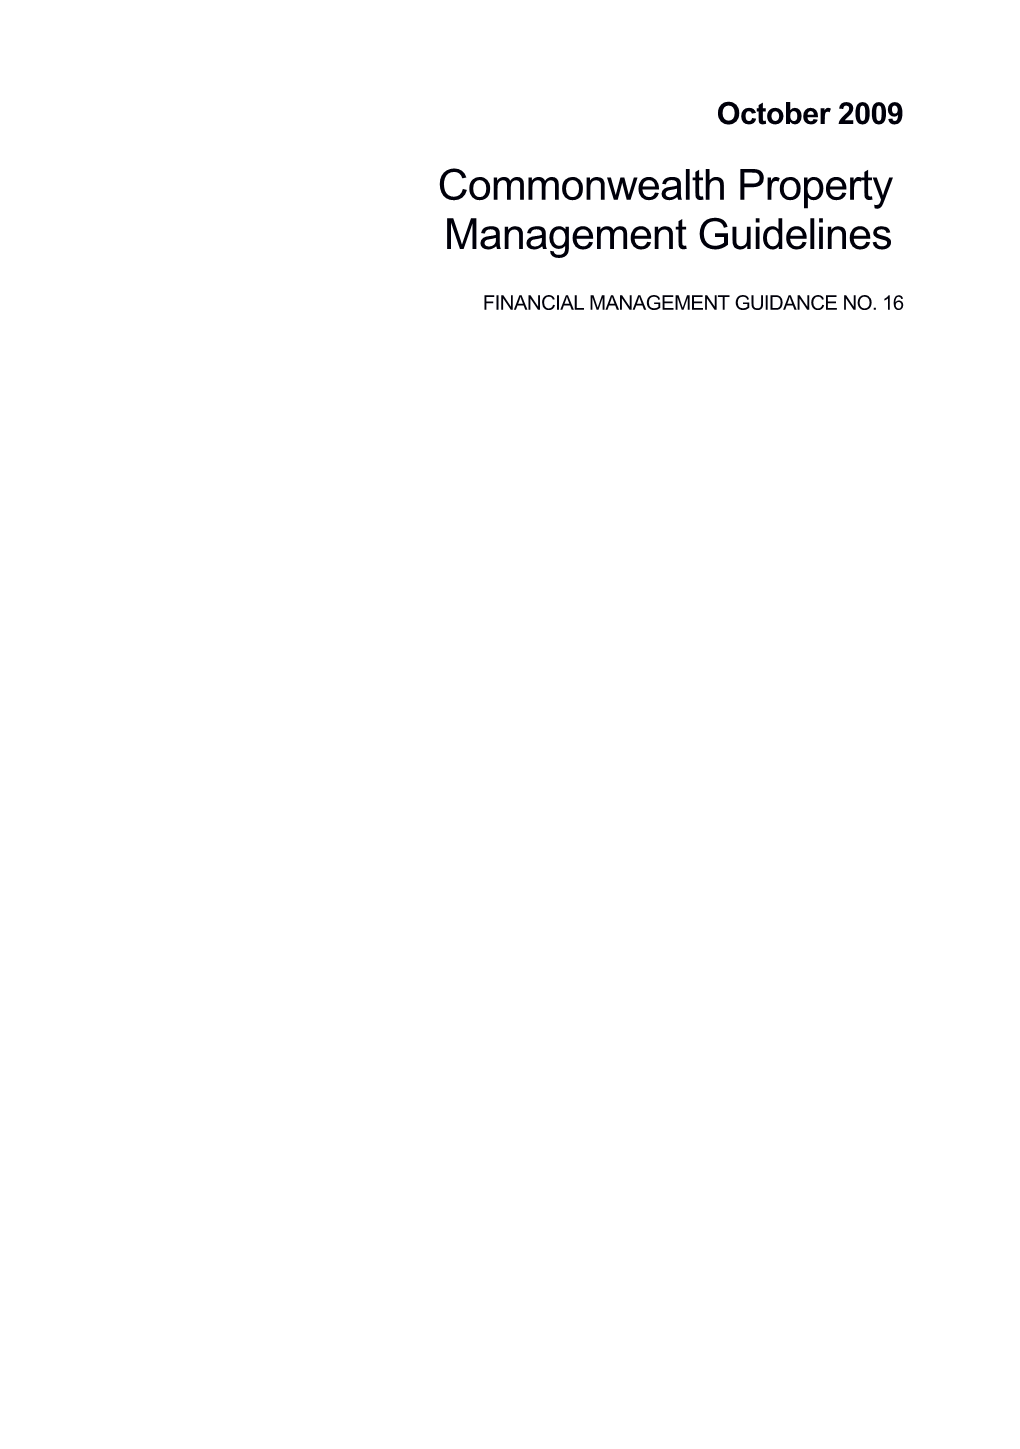 Commonwealth Property Management Guidelines